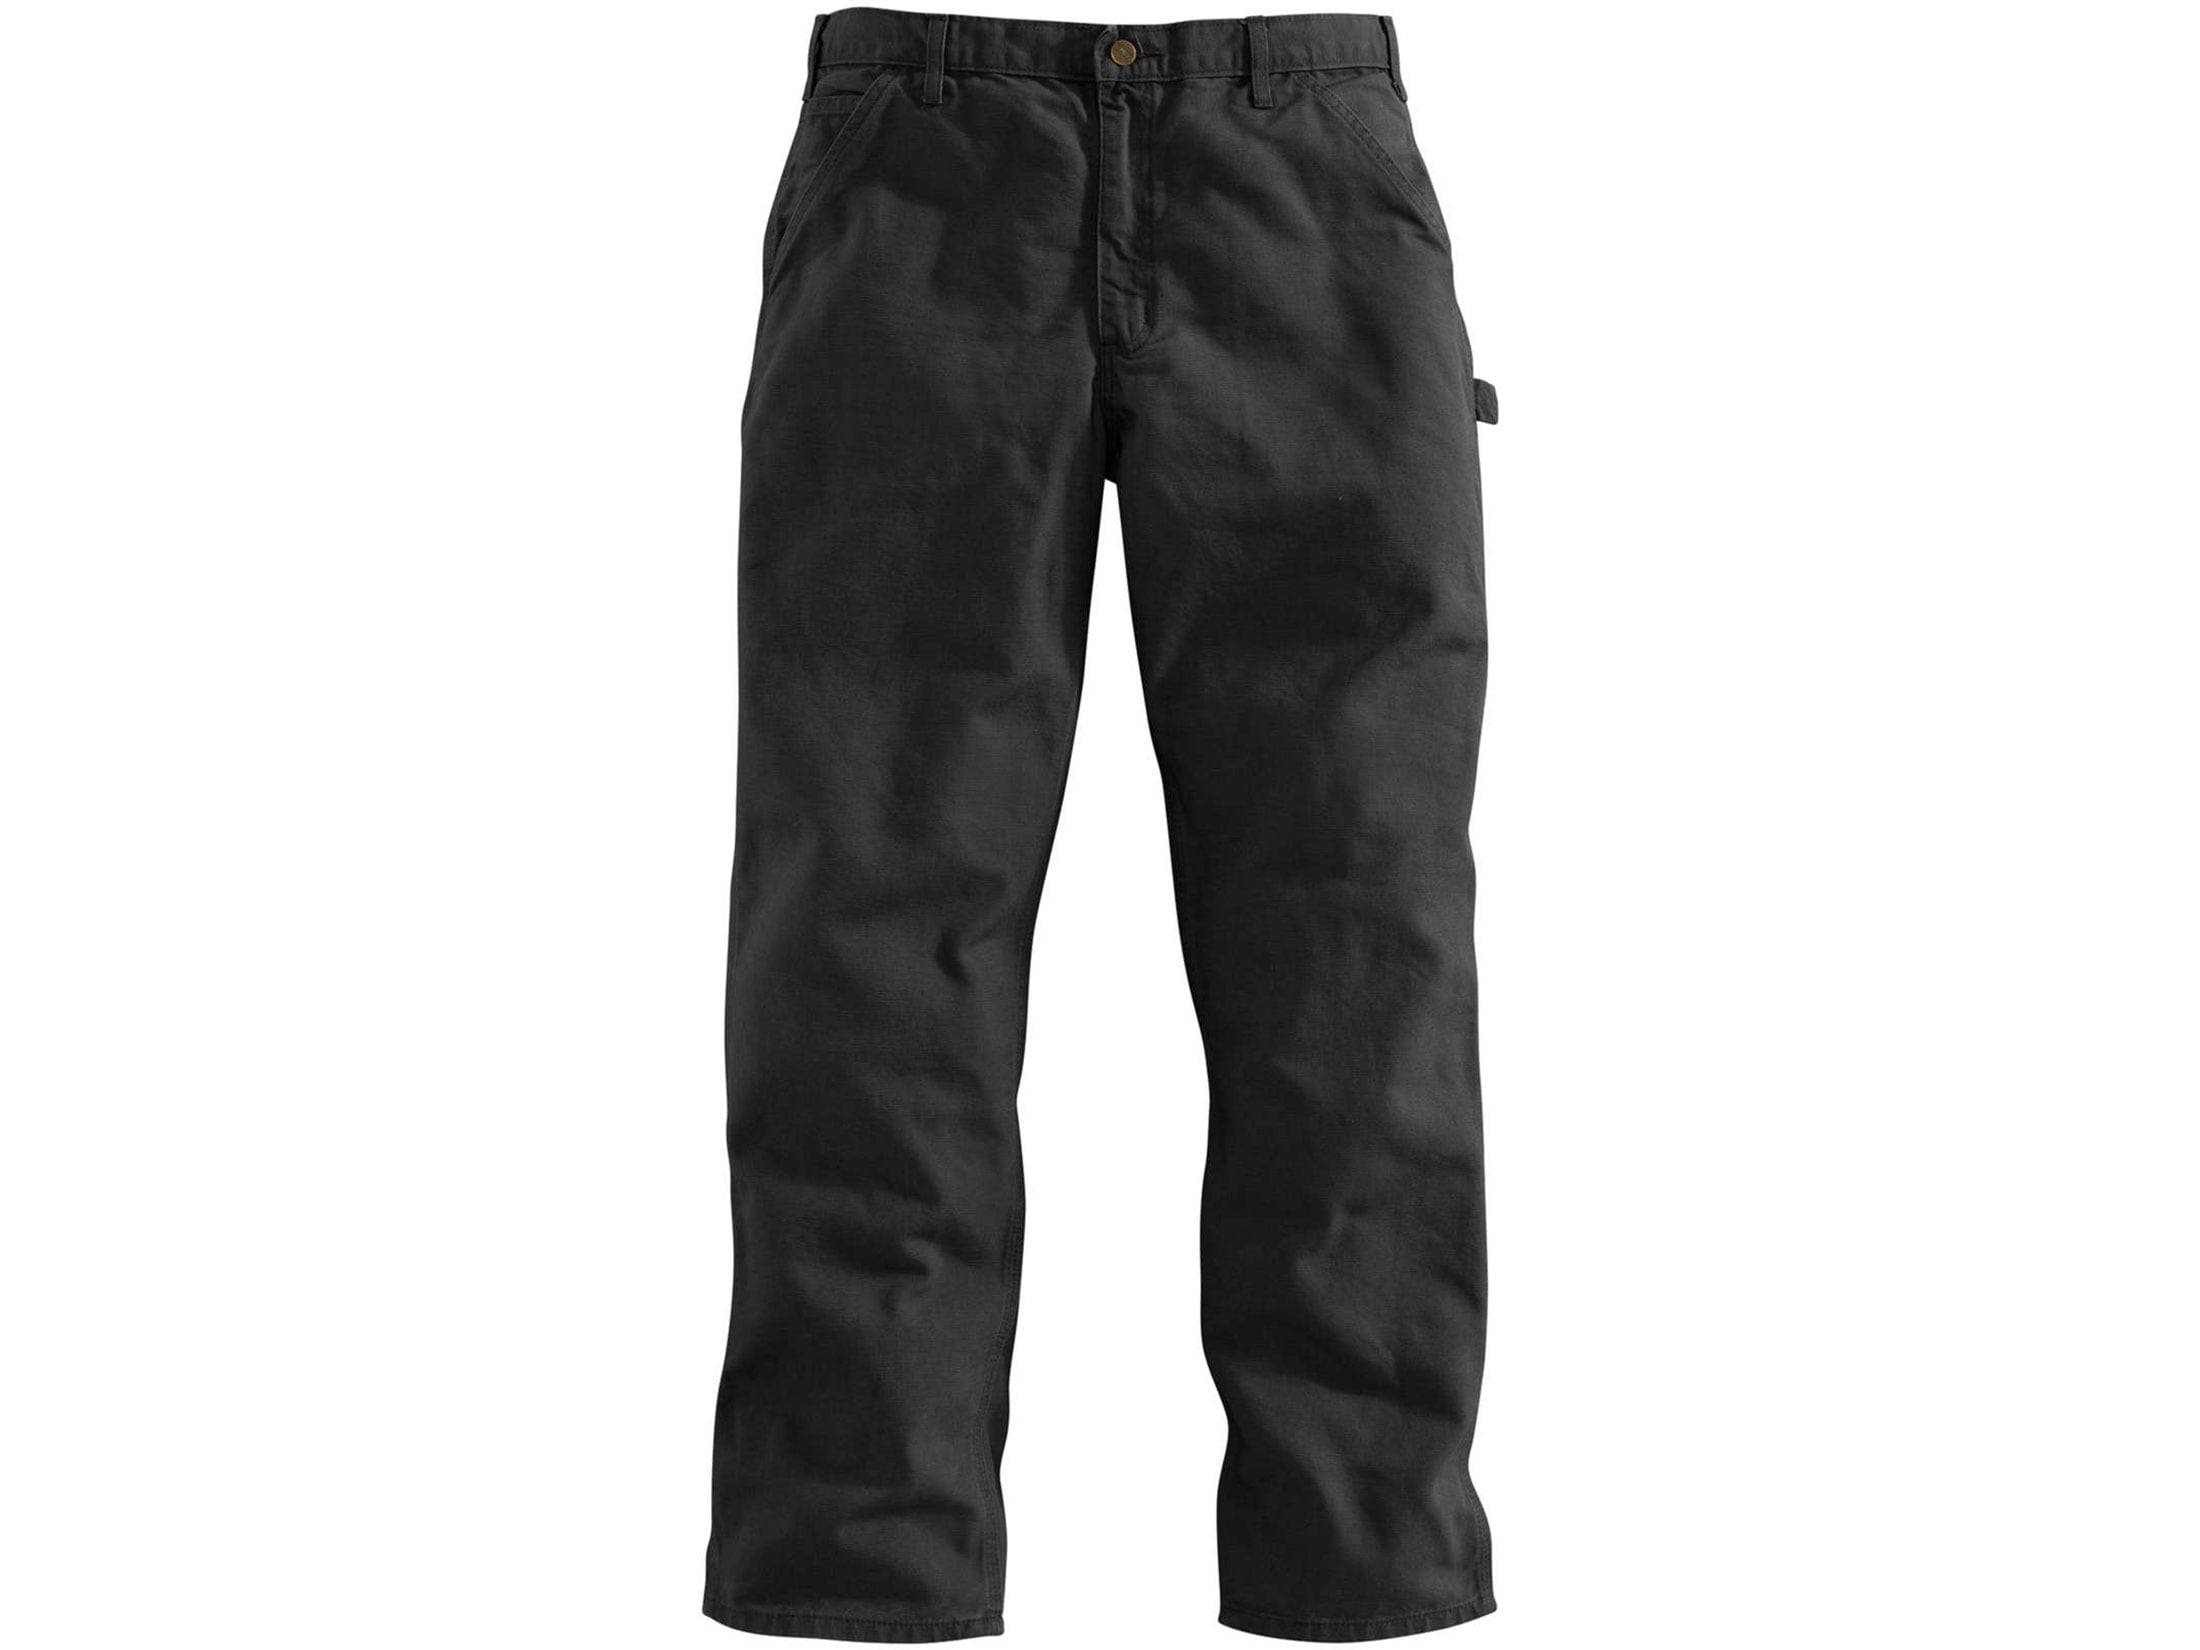 Carhartt Men's Loose Fit Washed Duck Utility Work Pants Moss 42 Waist